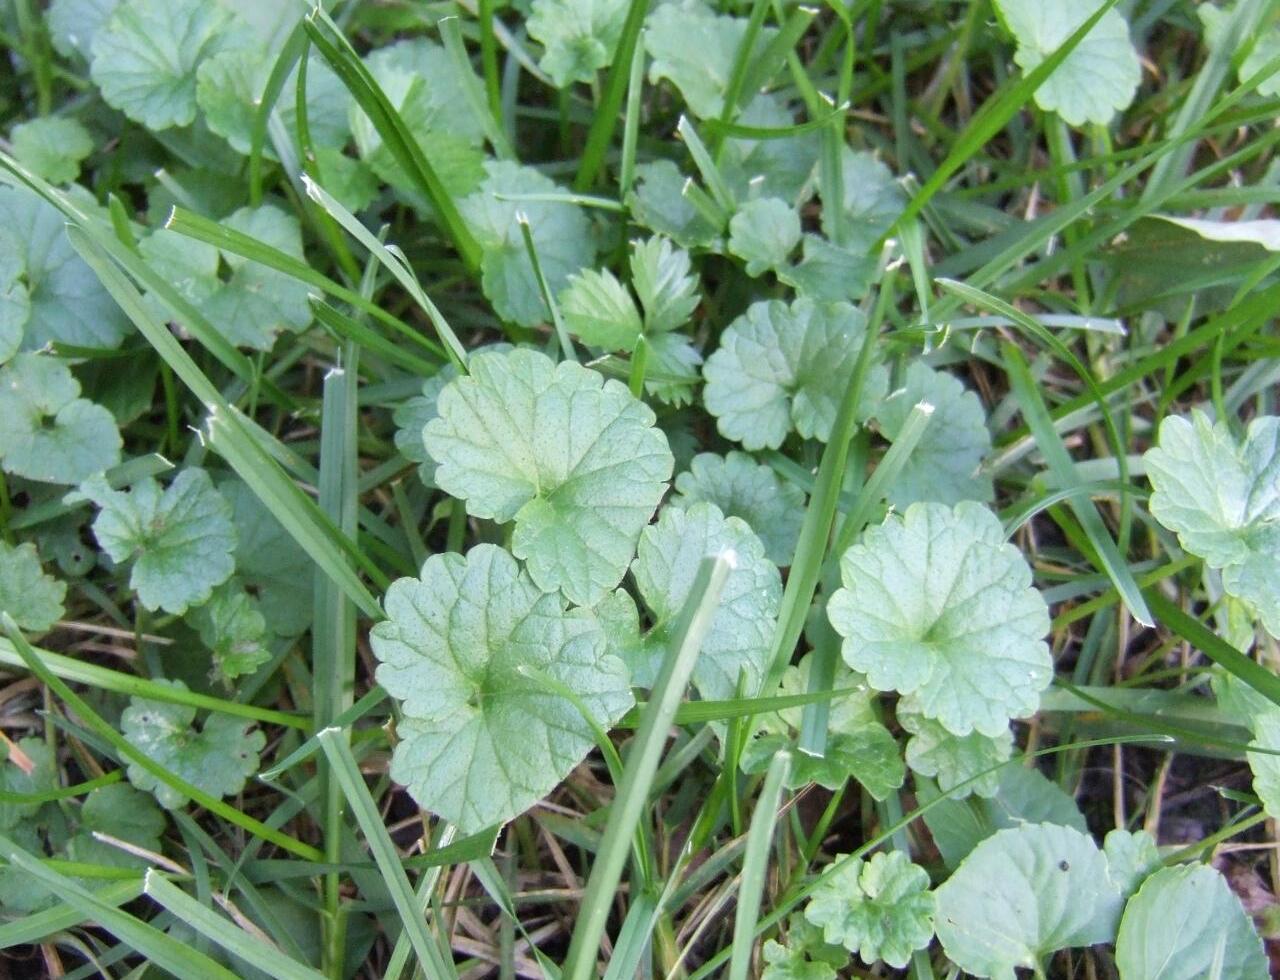 How To Get Rid Of Ground Ivy Without Killing Grass | Storables